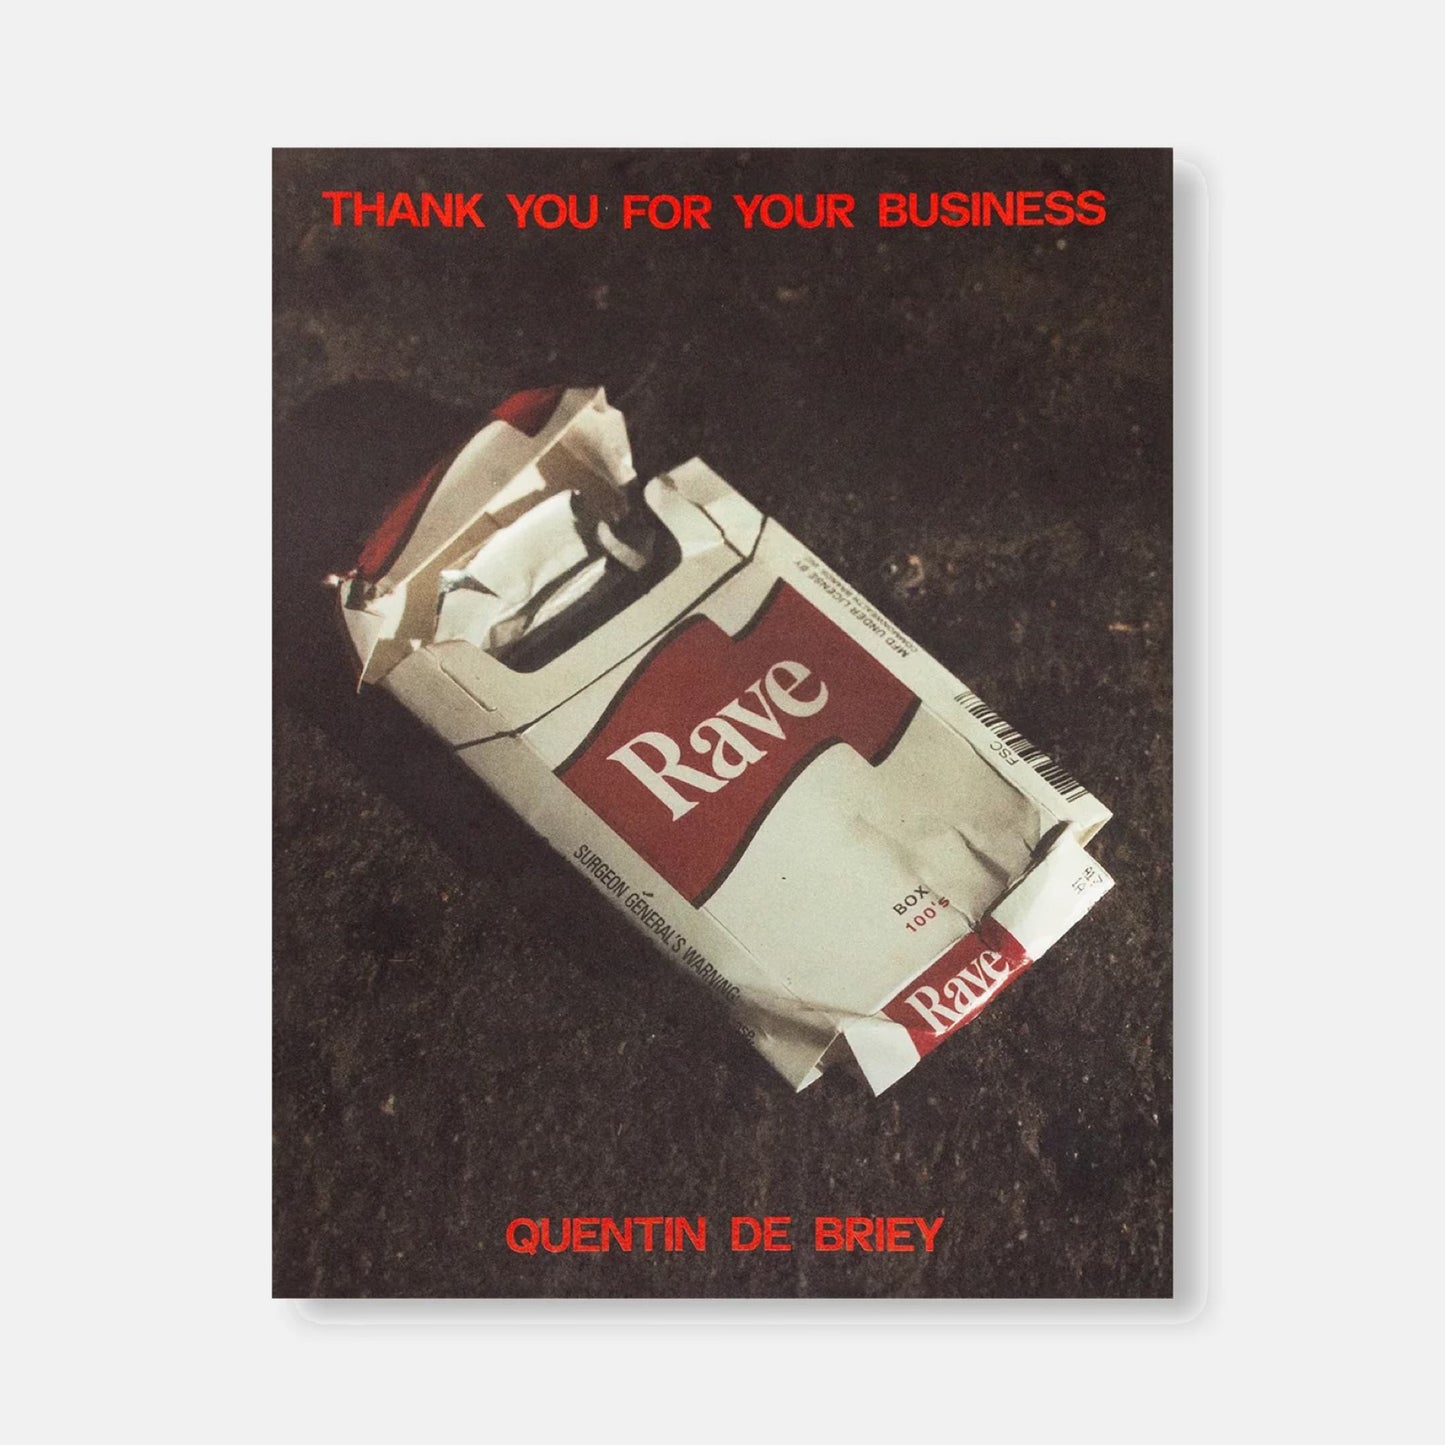 THANK YOU FOR YOUR BUSINESS by Quentin de Briey [FIRST EDITION]